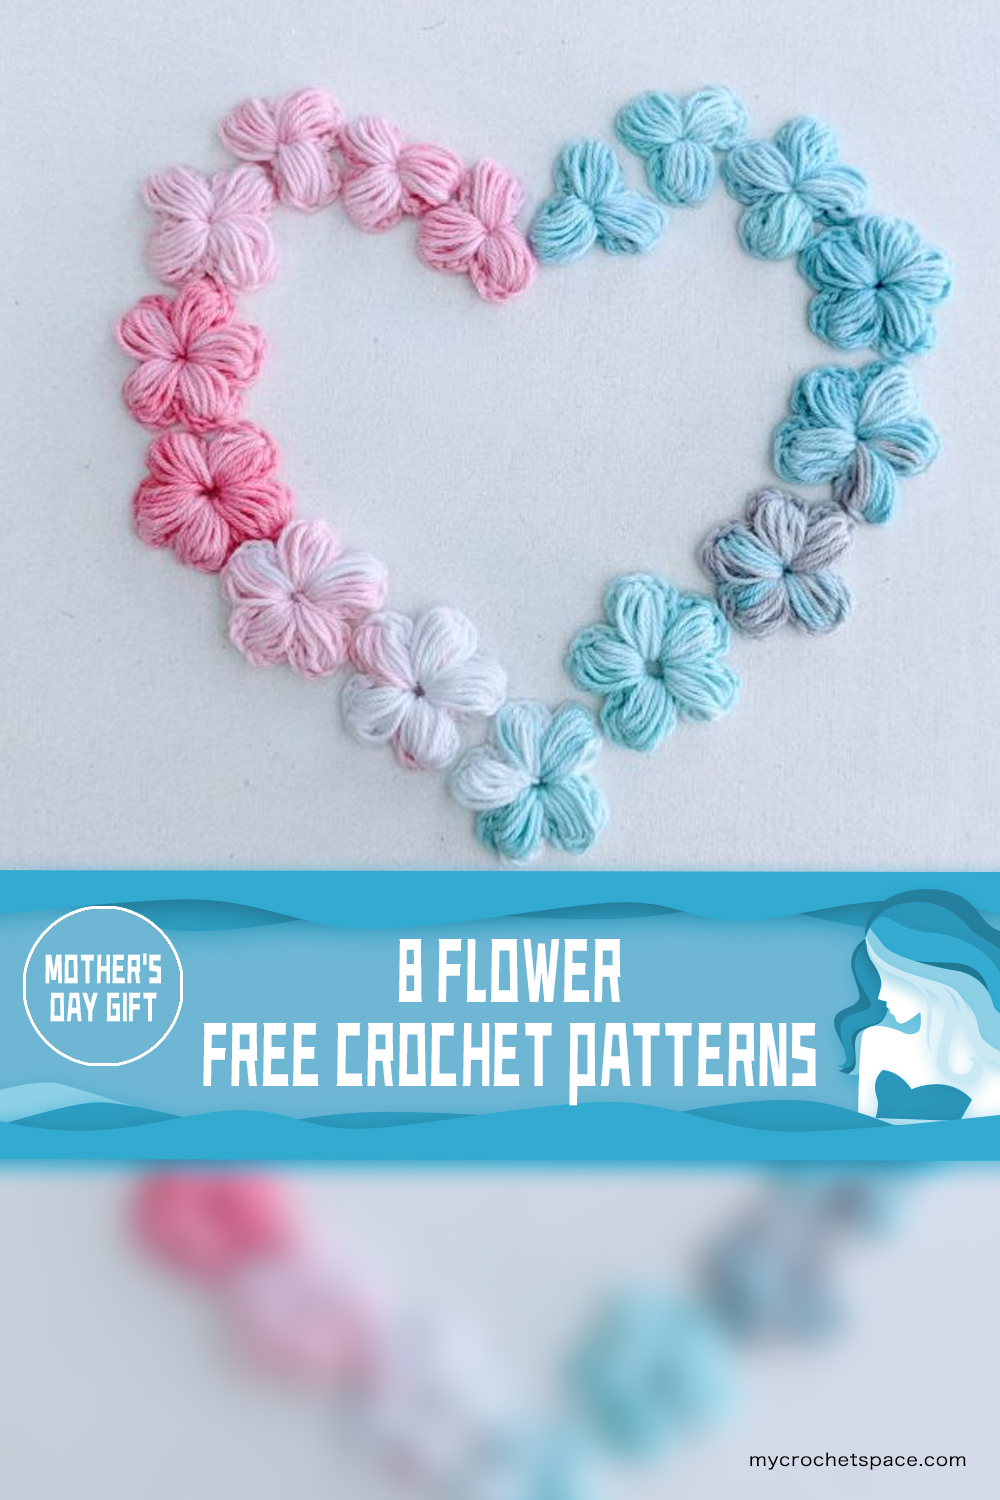 8 Flower FREE Crochet Patterns for Mother's Day Gift 